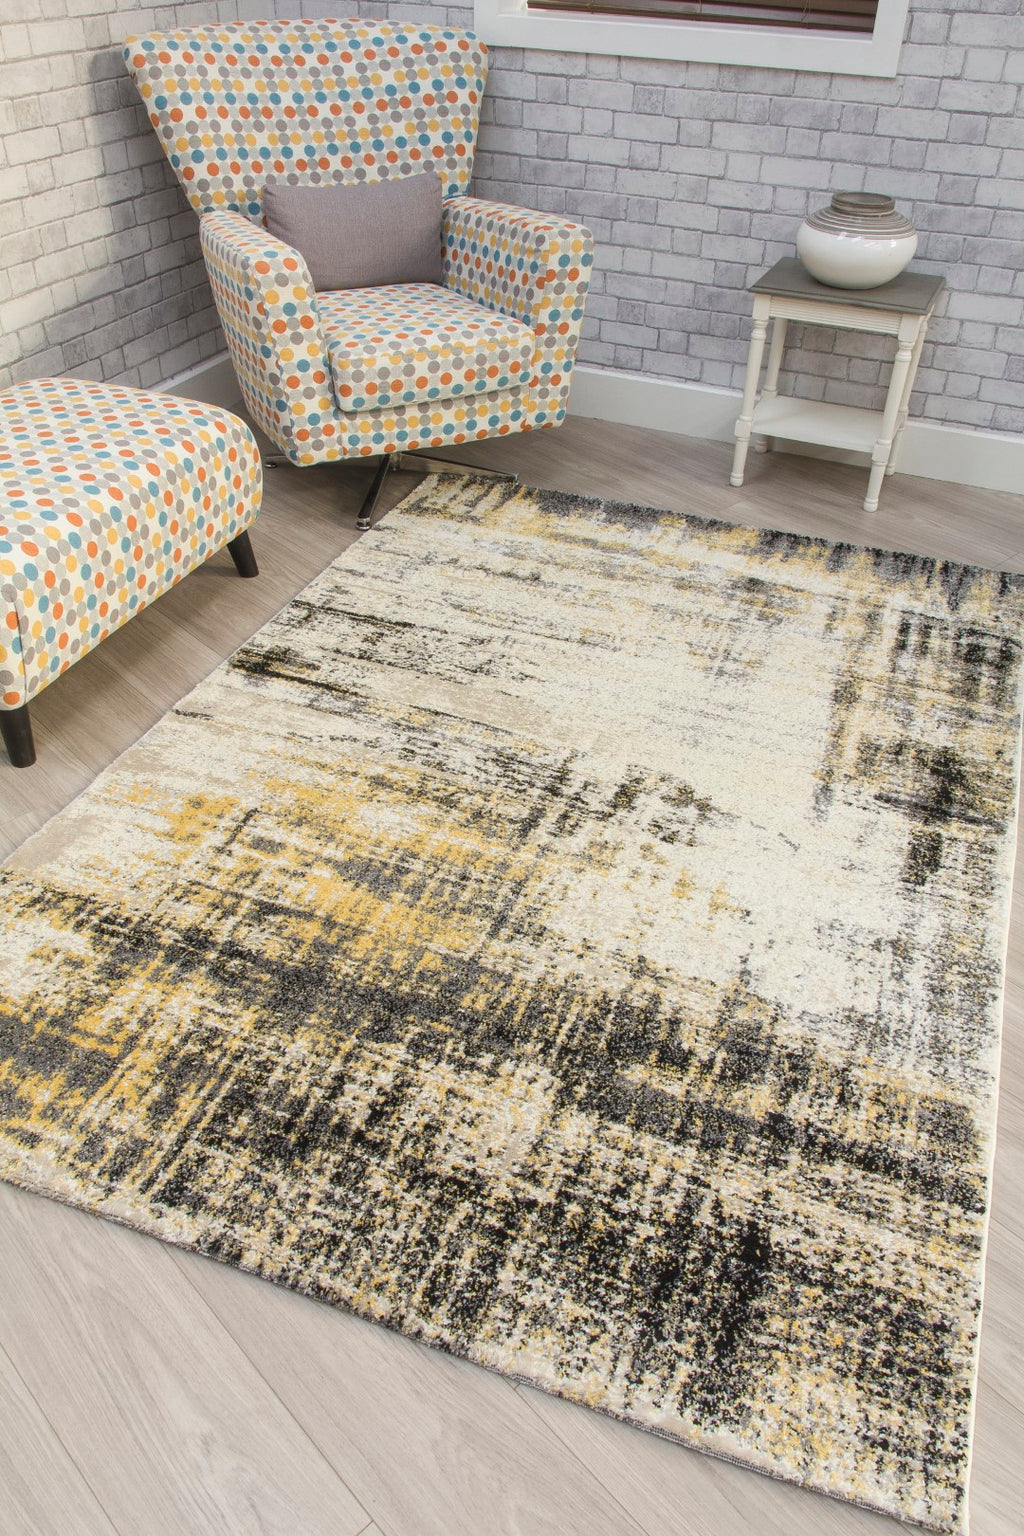 Ochre Accents Rug Gorgeous ochre accents rug.